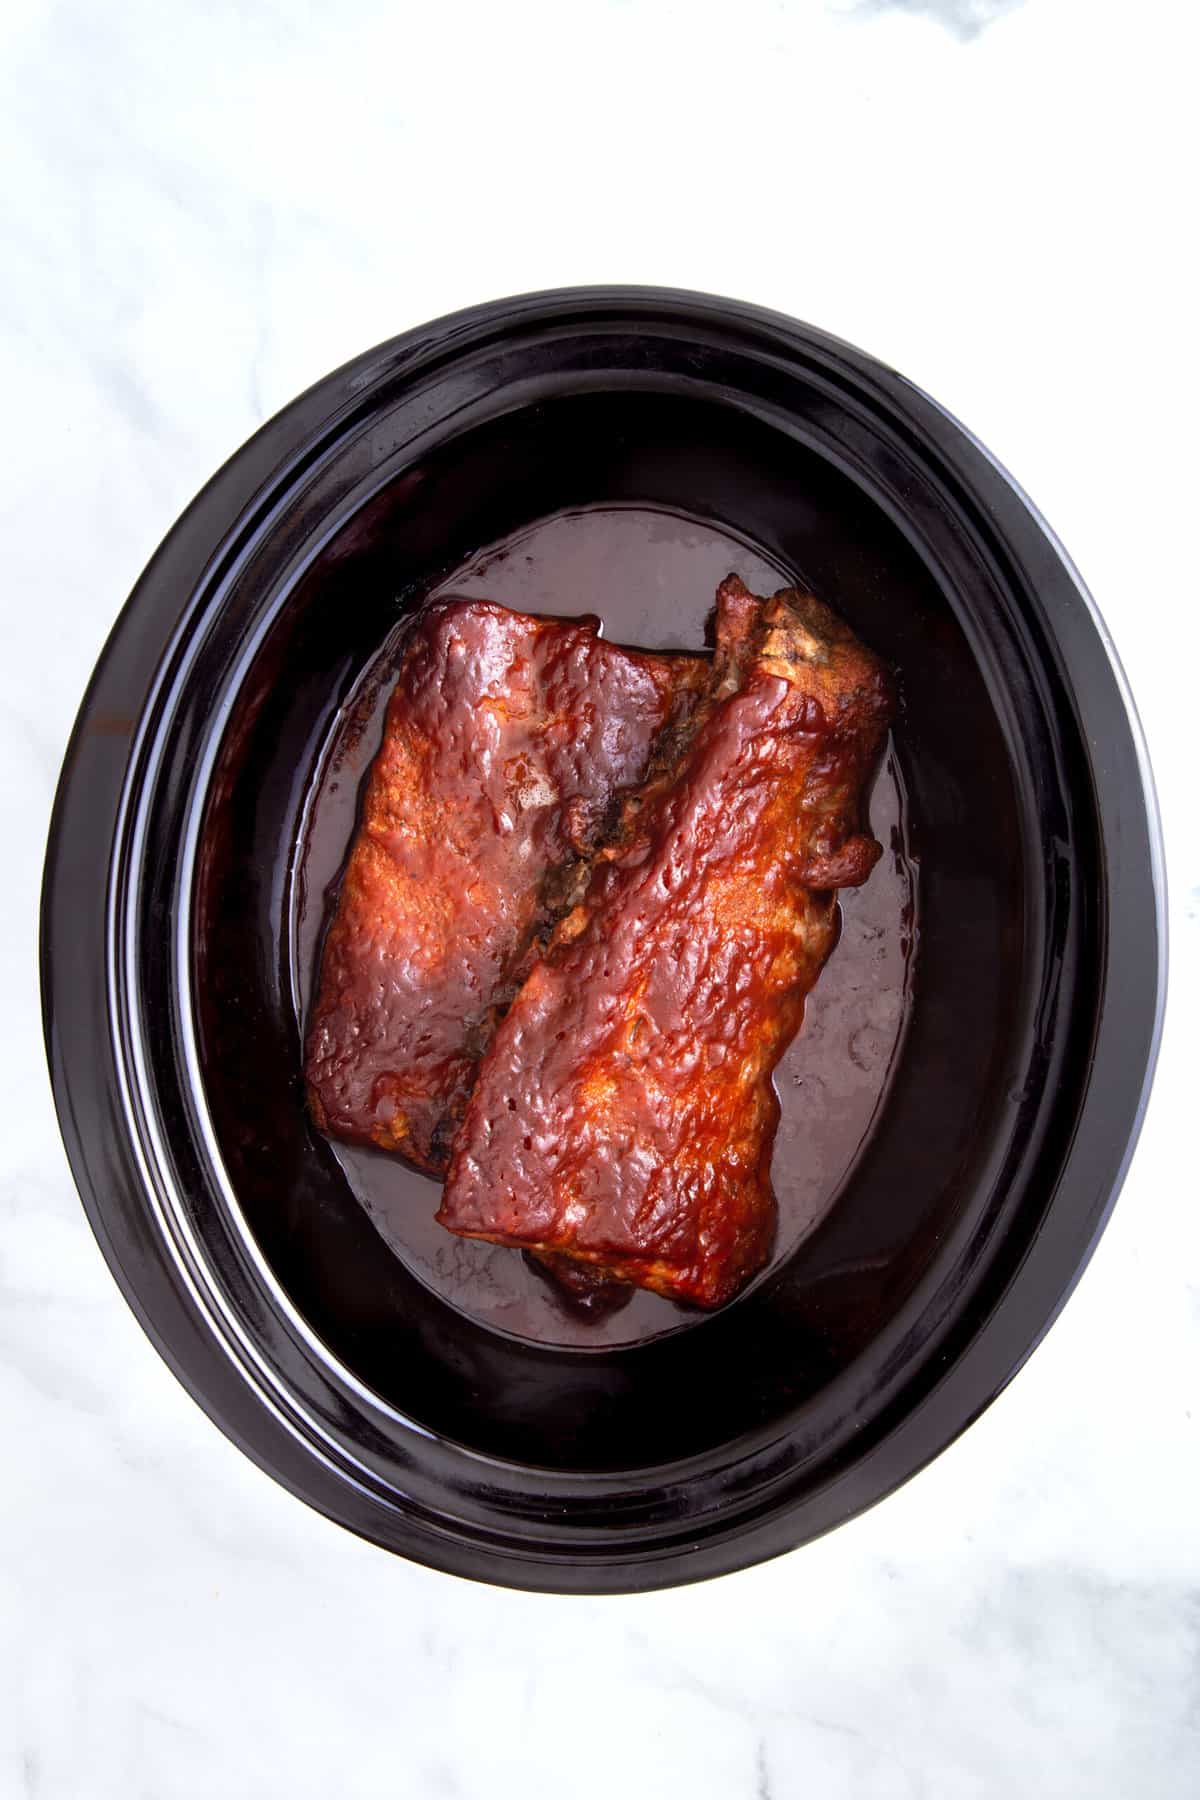 cooked ribs in a slow cooker